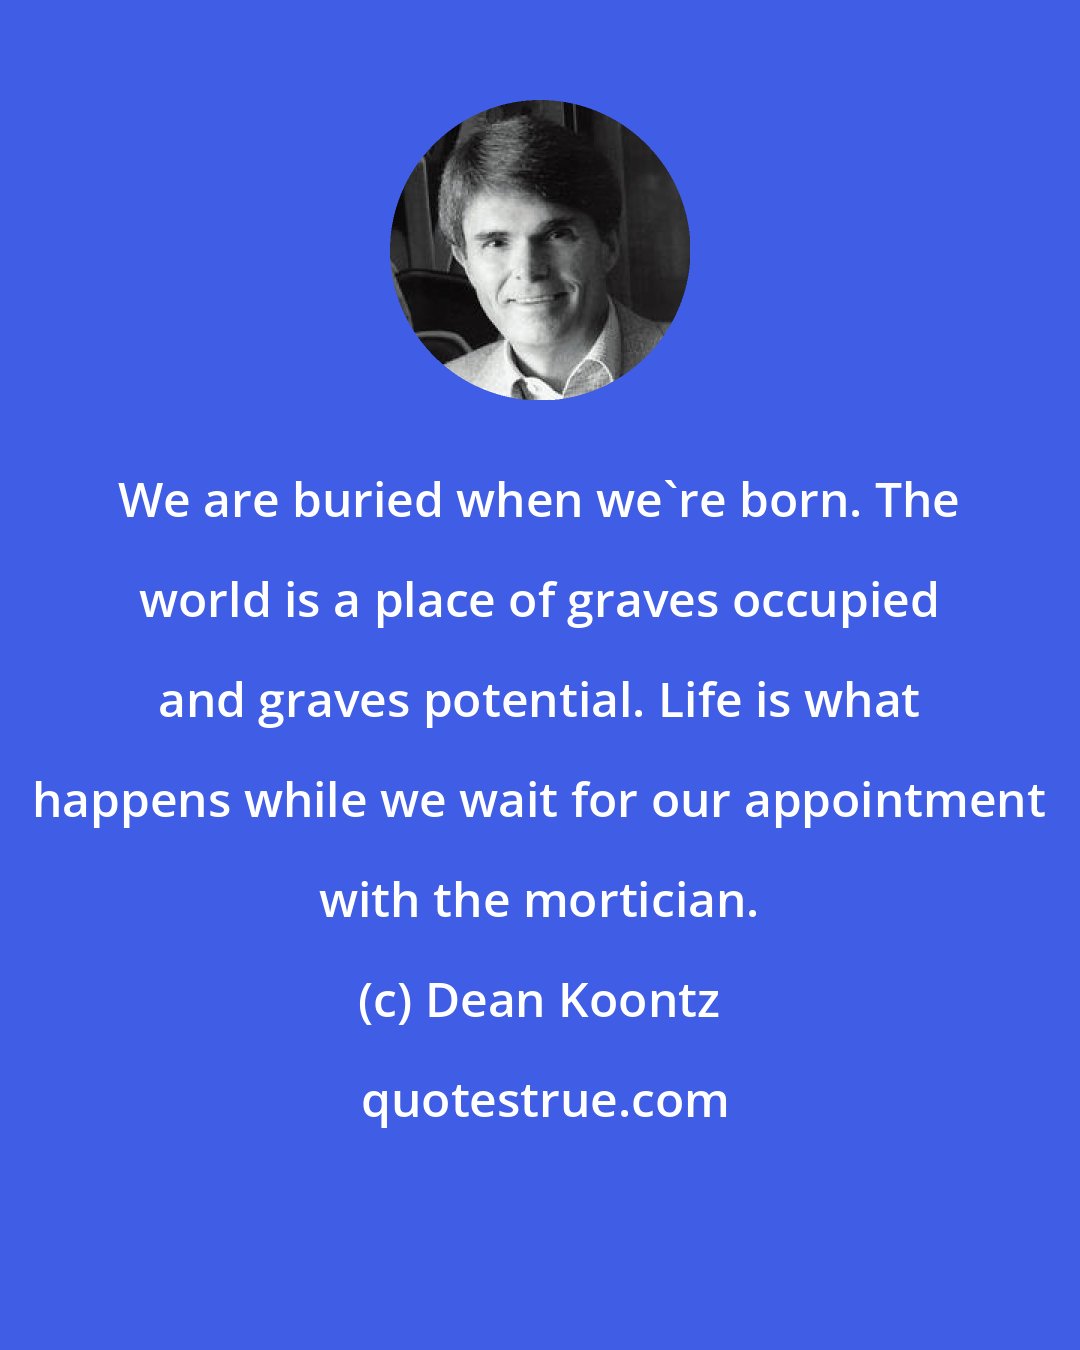 Dean Koontz: We are buried when we're born. The world is a place of graves occupied and graves potential. Life is what happens while we wait for our appointment with the mortician.